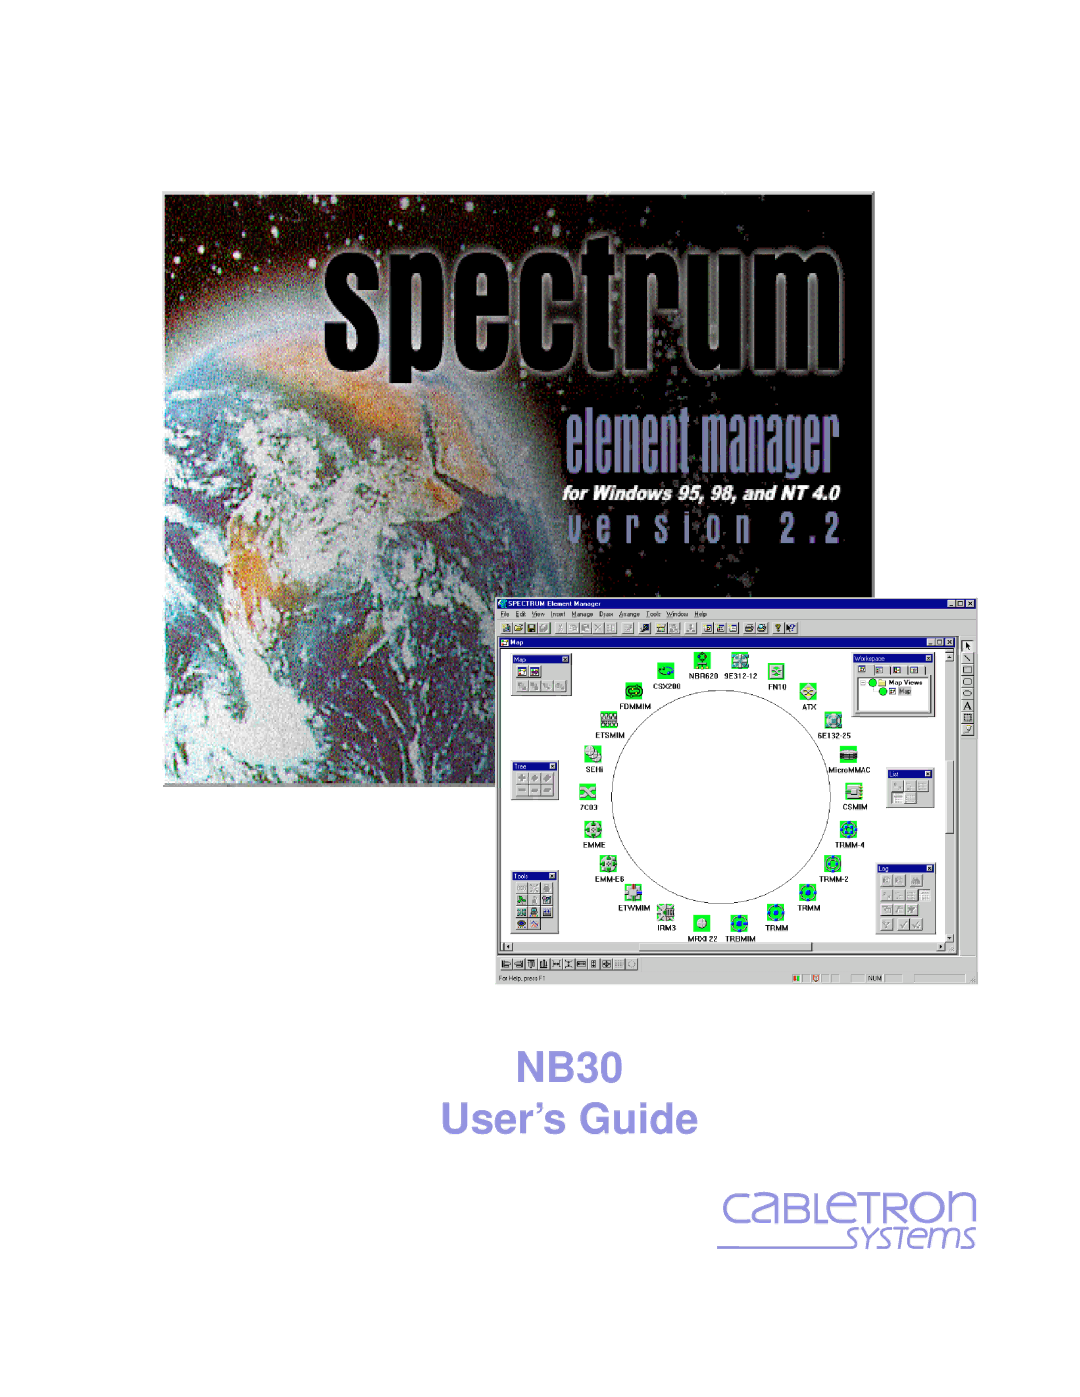 Cabletron Systems manual NB30 User’s Guide 